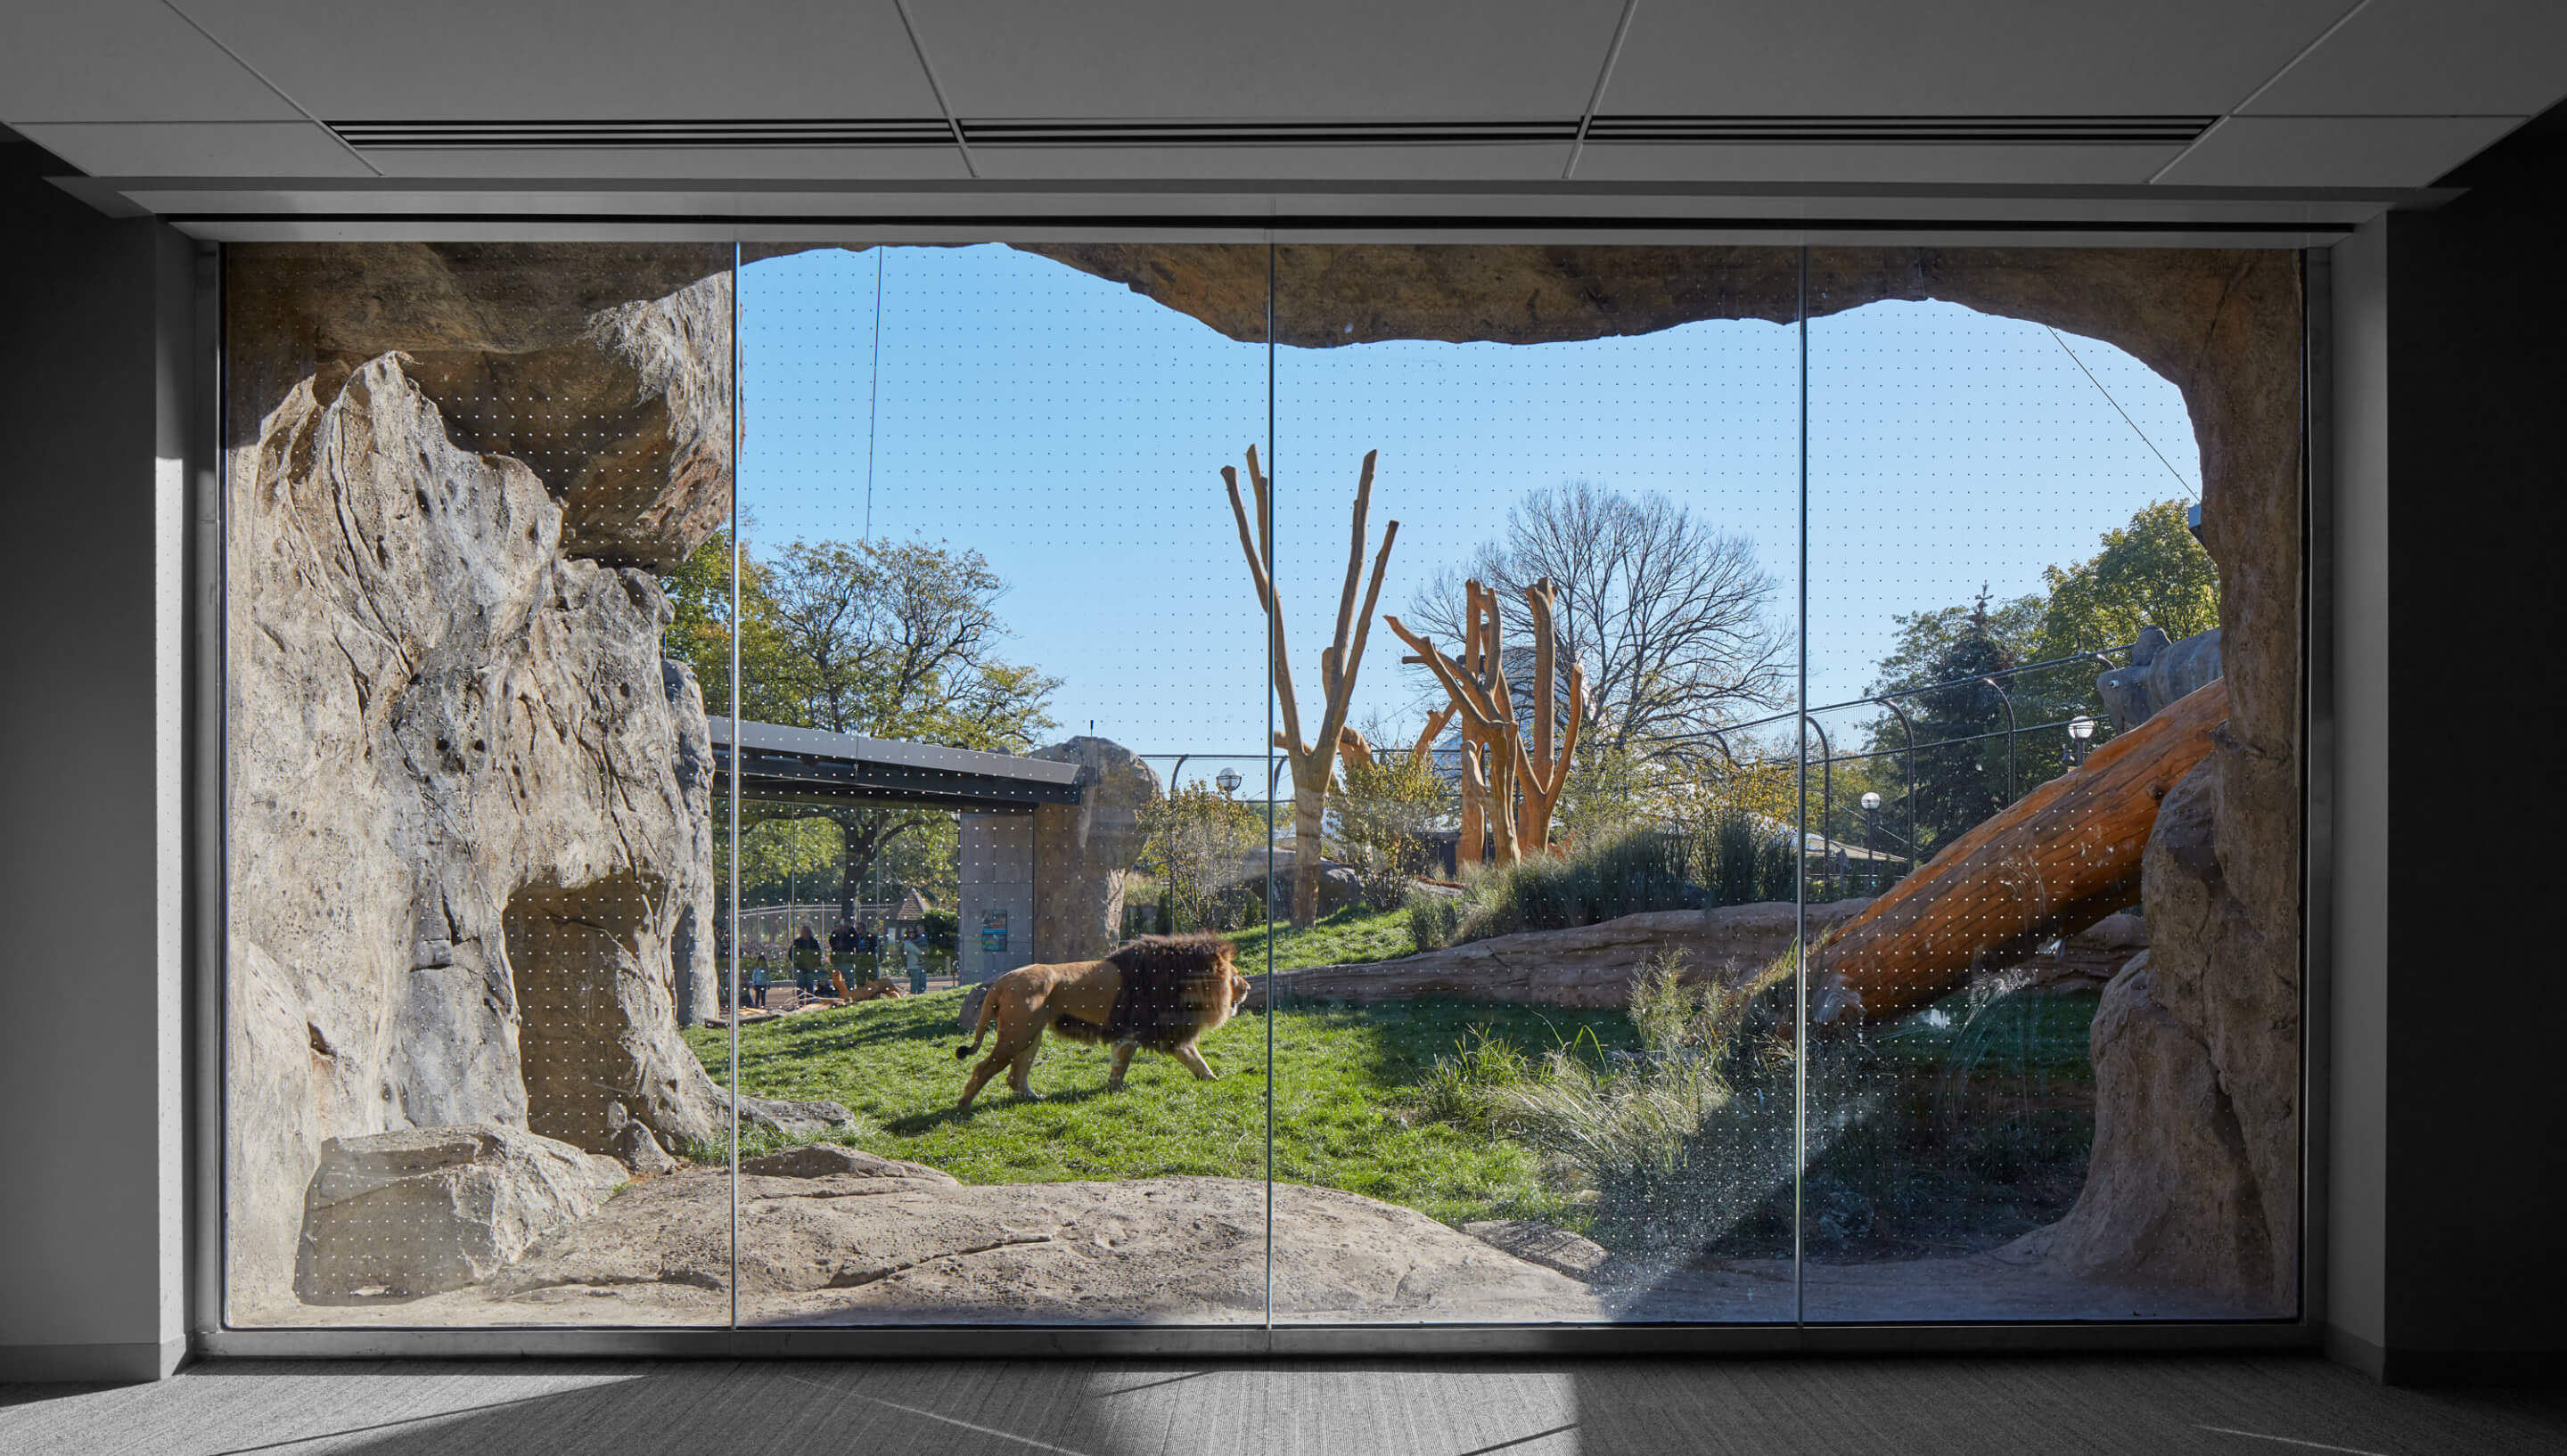 view of a lion in an enclosure through glass